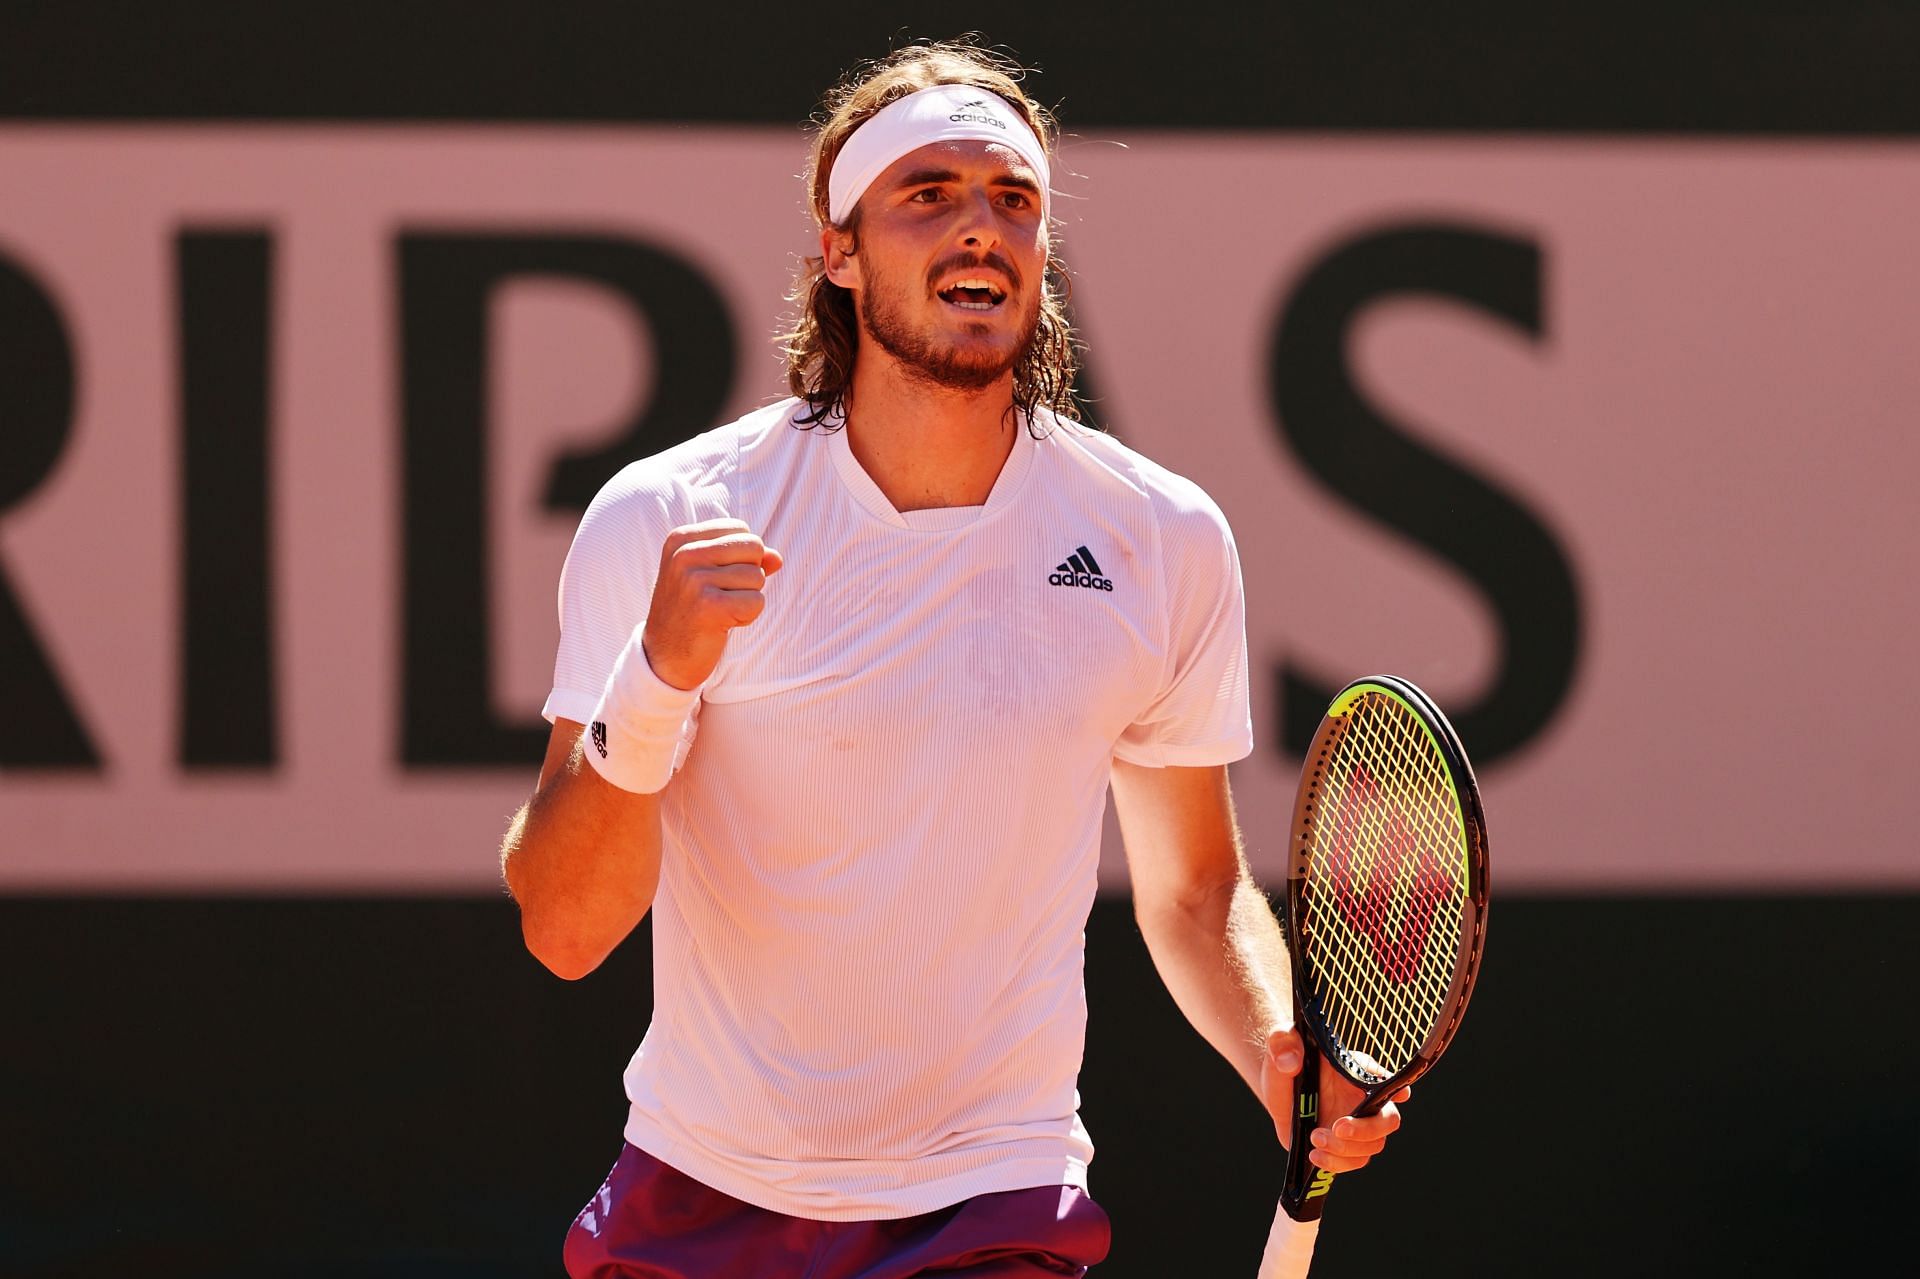 Stefanos Tsitsipas at the 2021 French Open.